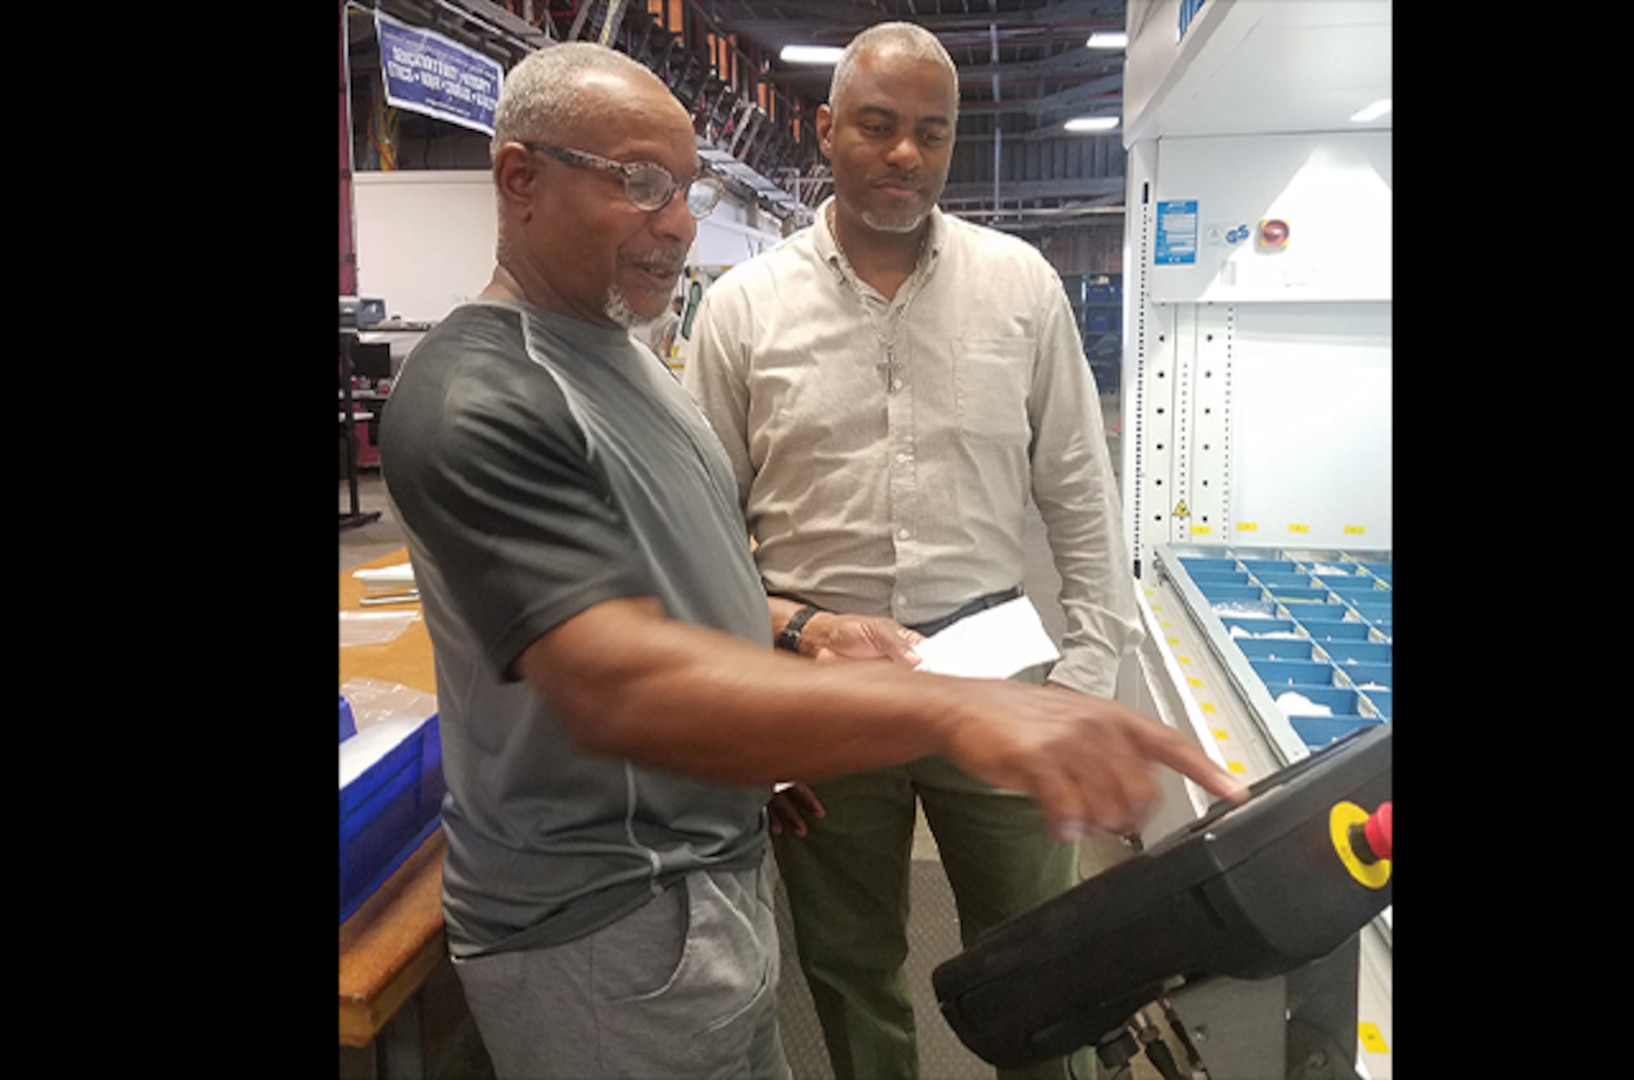 John Horton watches William Bland demonstrate an automated product retrieval system.